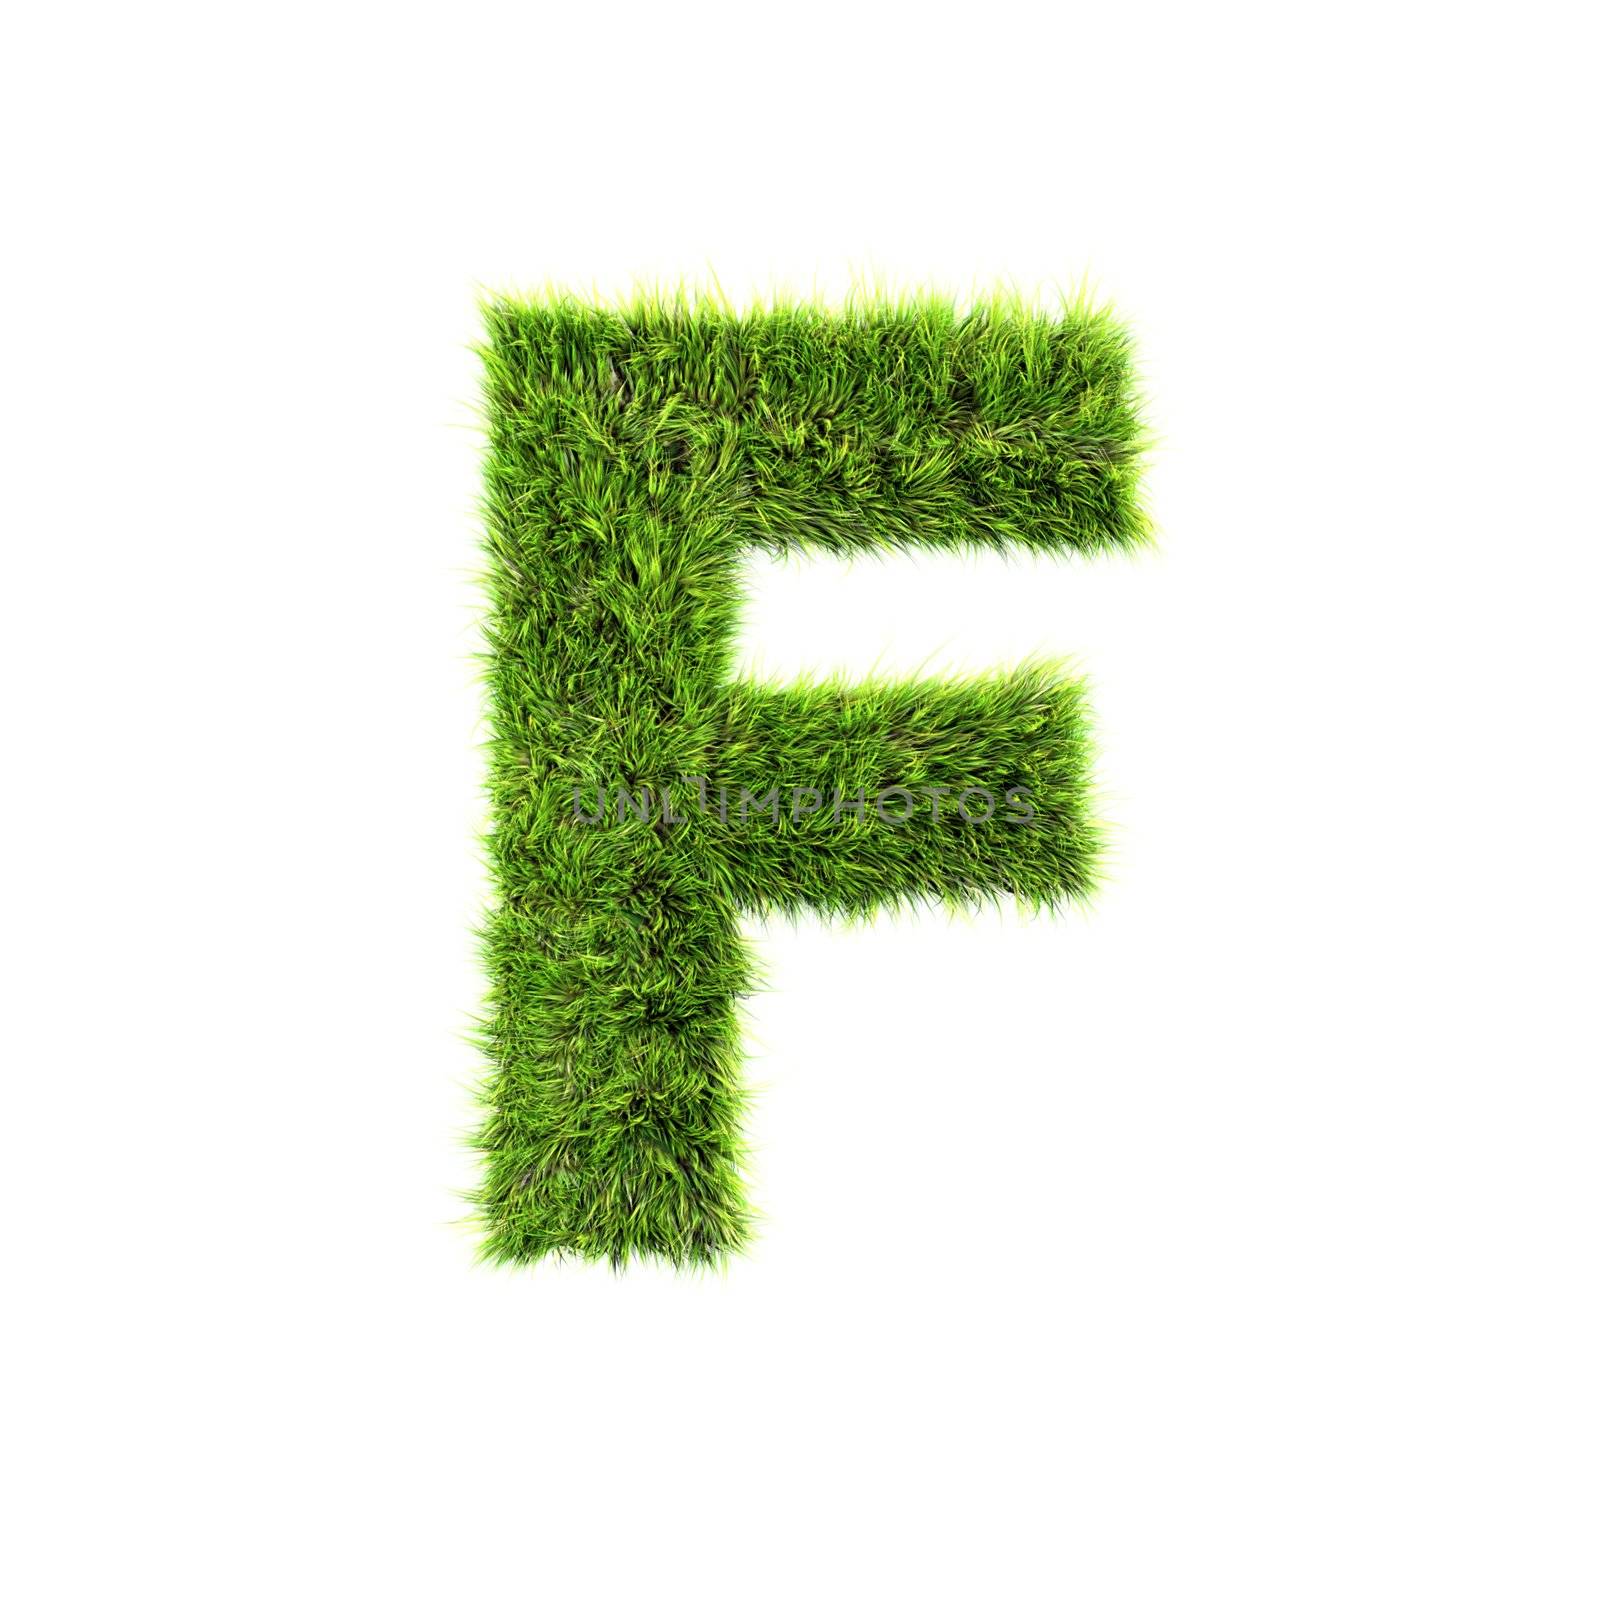 3d grass letter isolated on white background - F by chrisroll